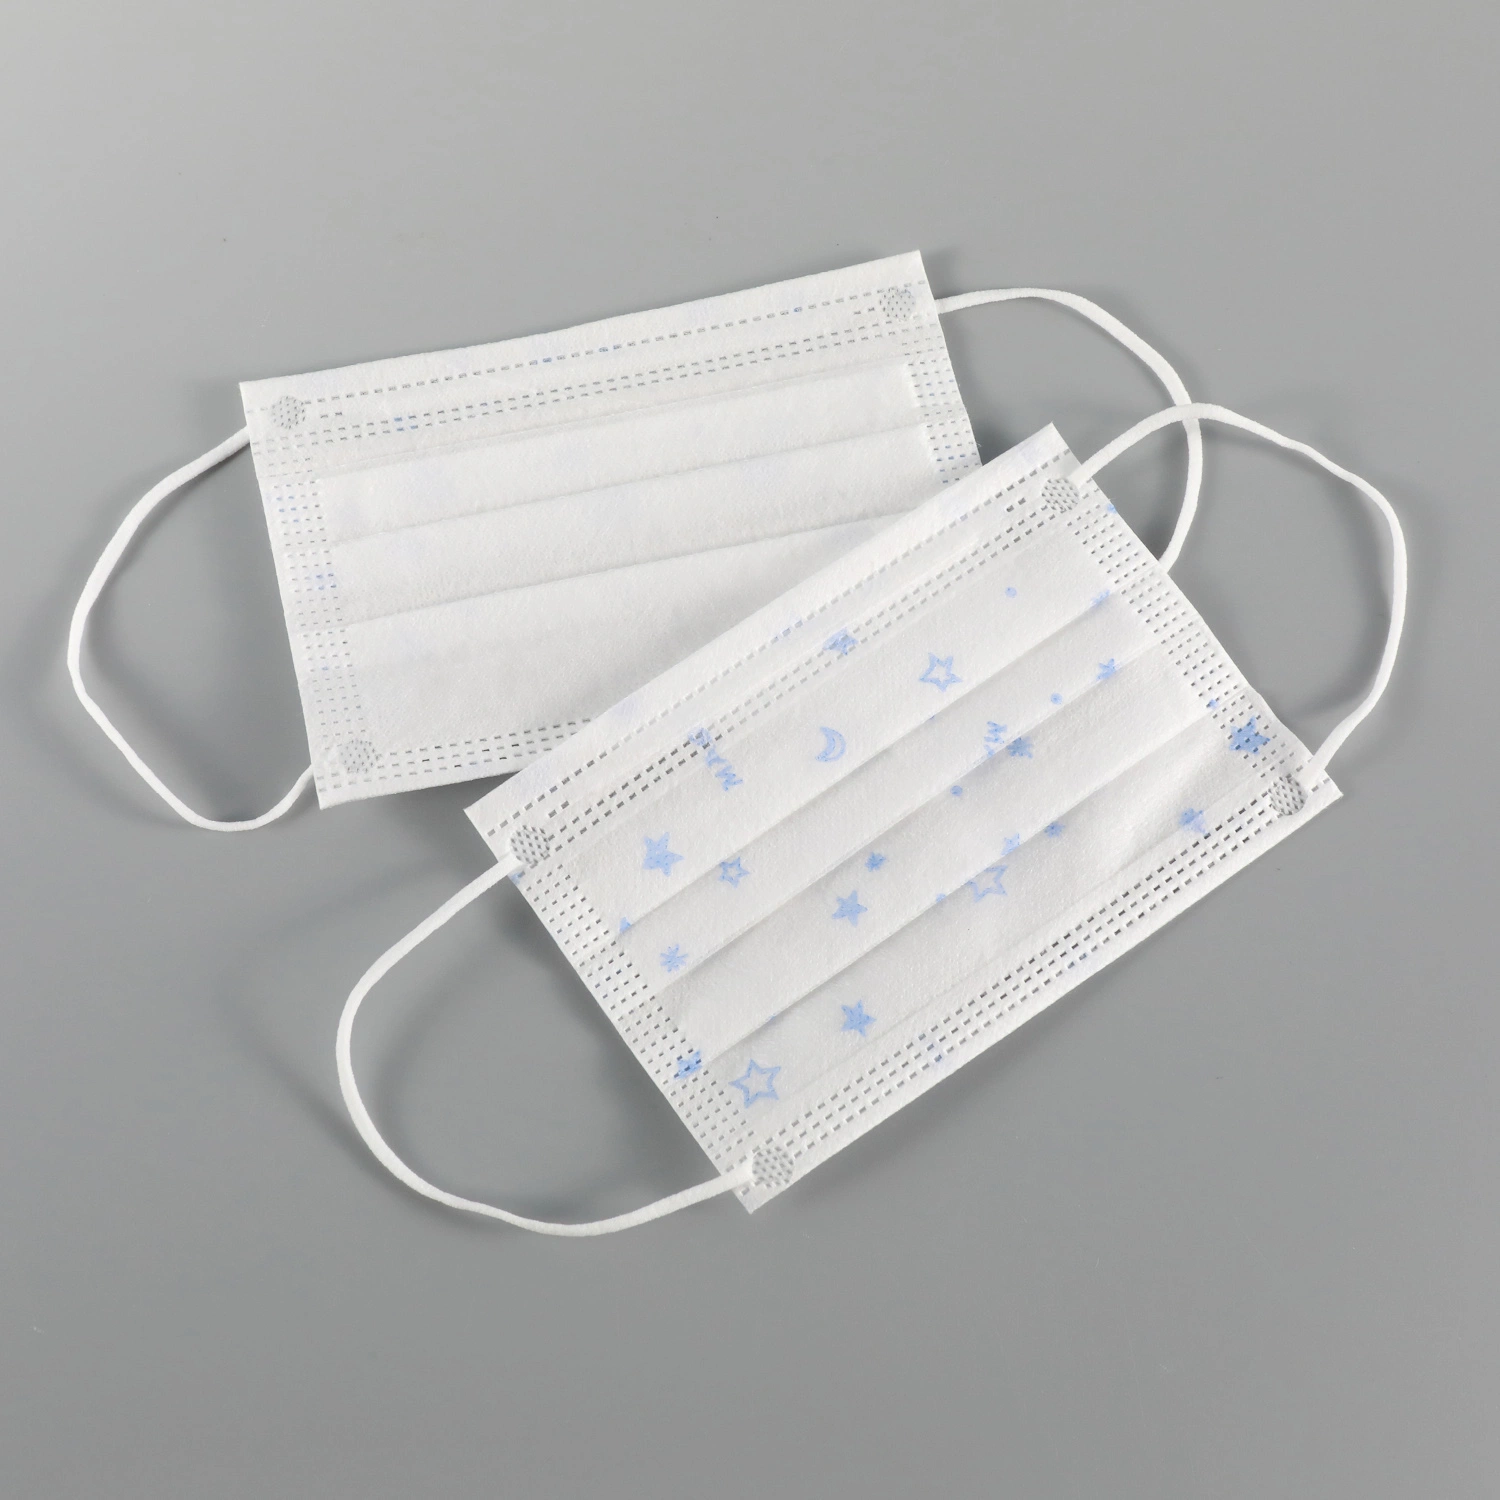 Disposable 3ply Mask for Perschooler